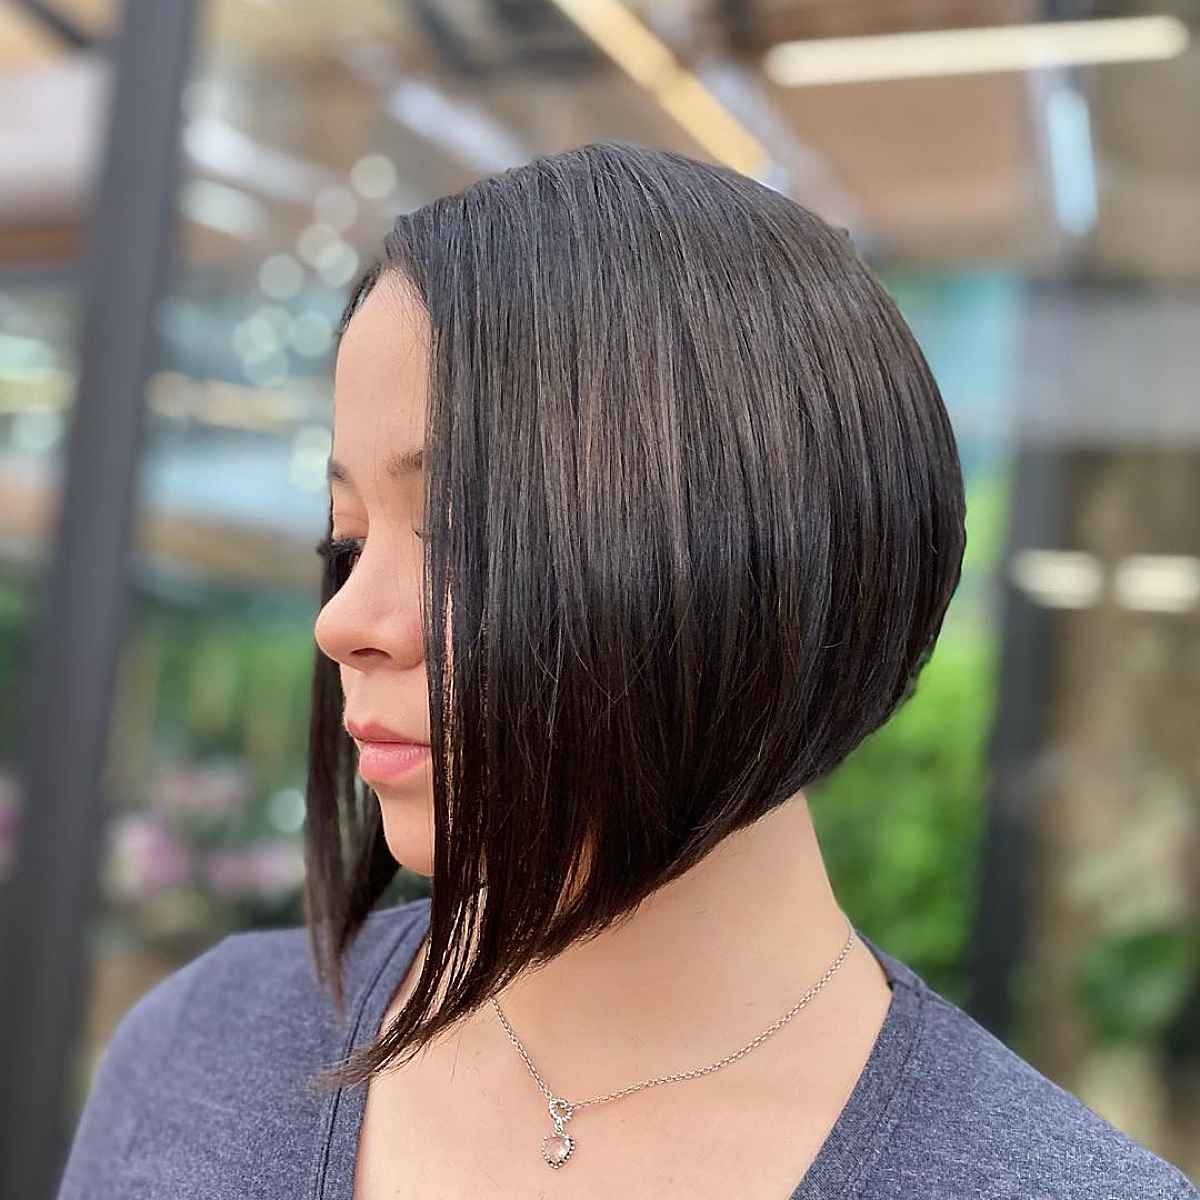 The Inverted Blunt Cut on mid-length hair